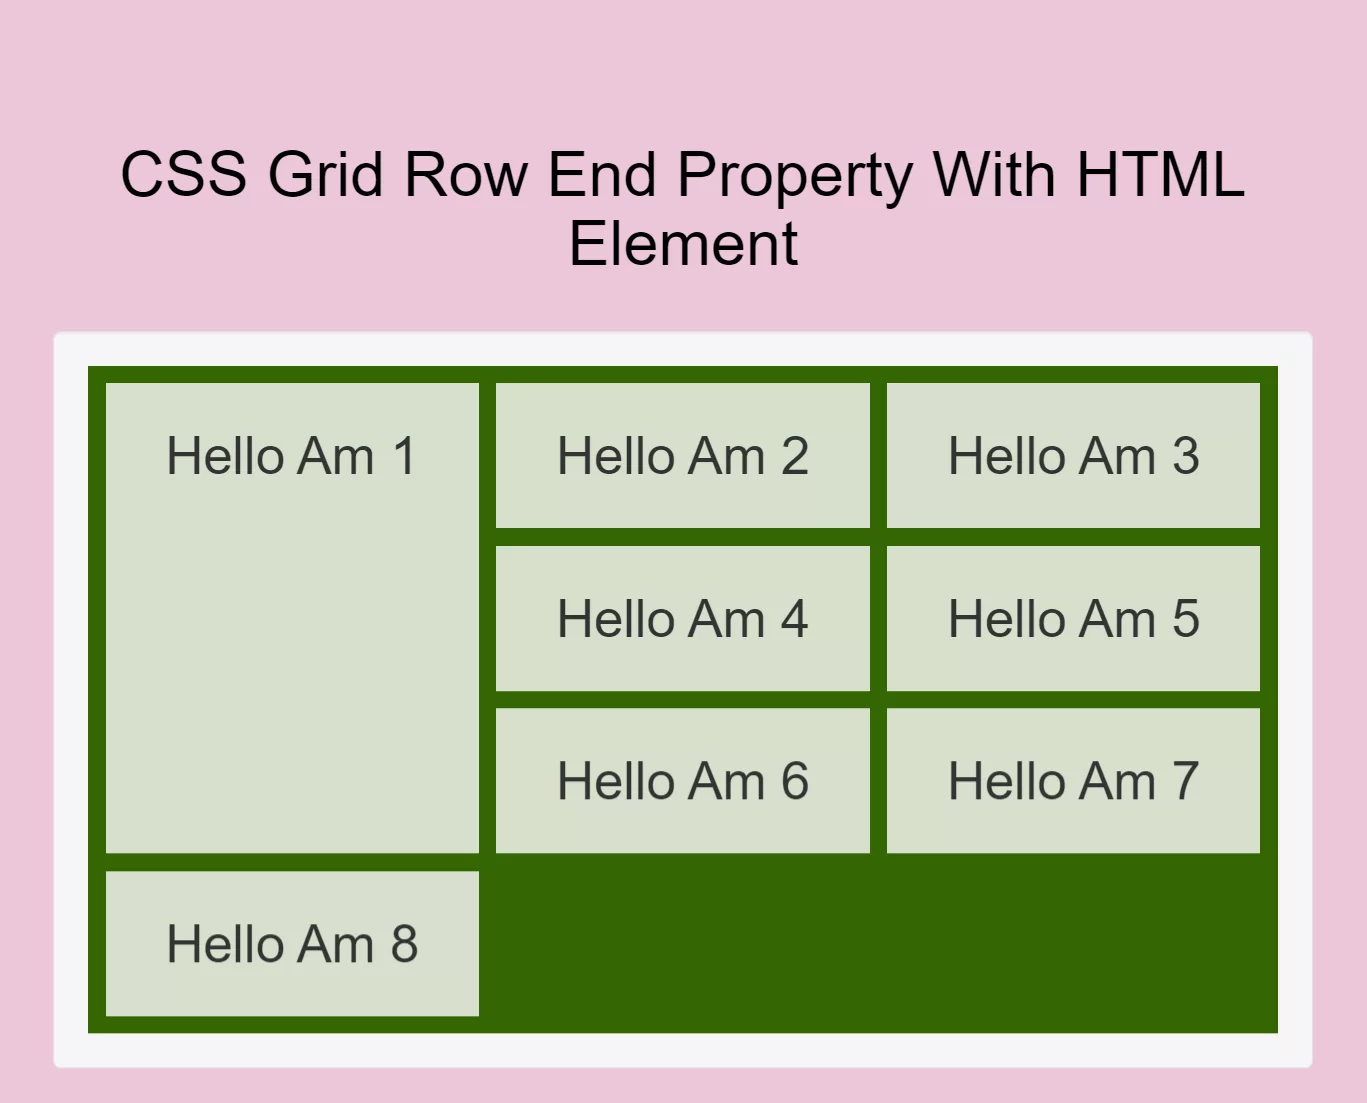 How To Use CSS Grid Row End Property With HTML Element